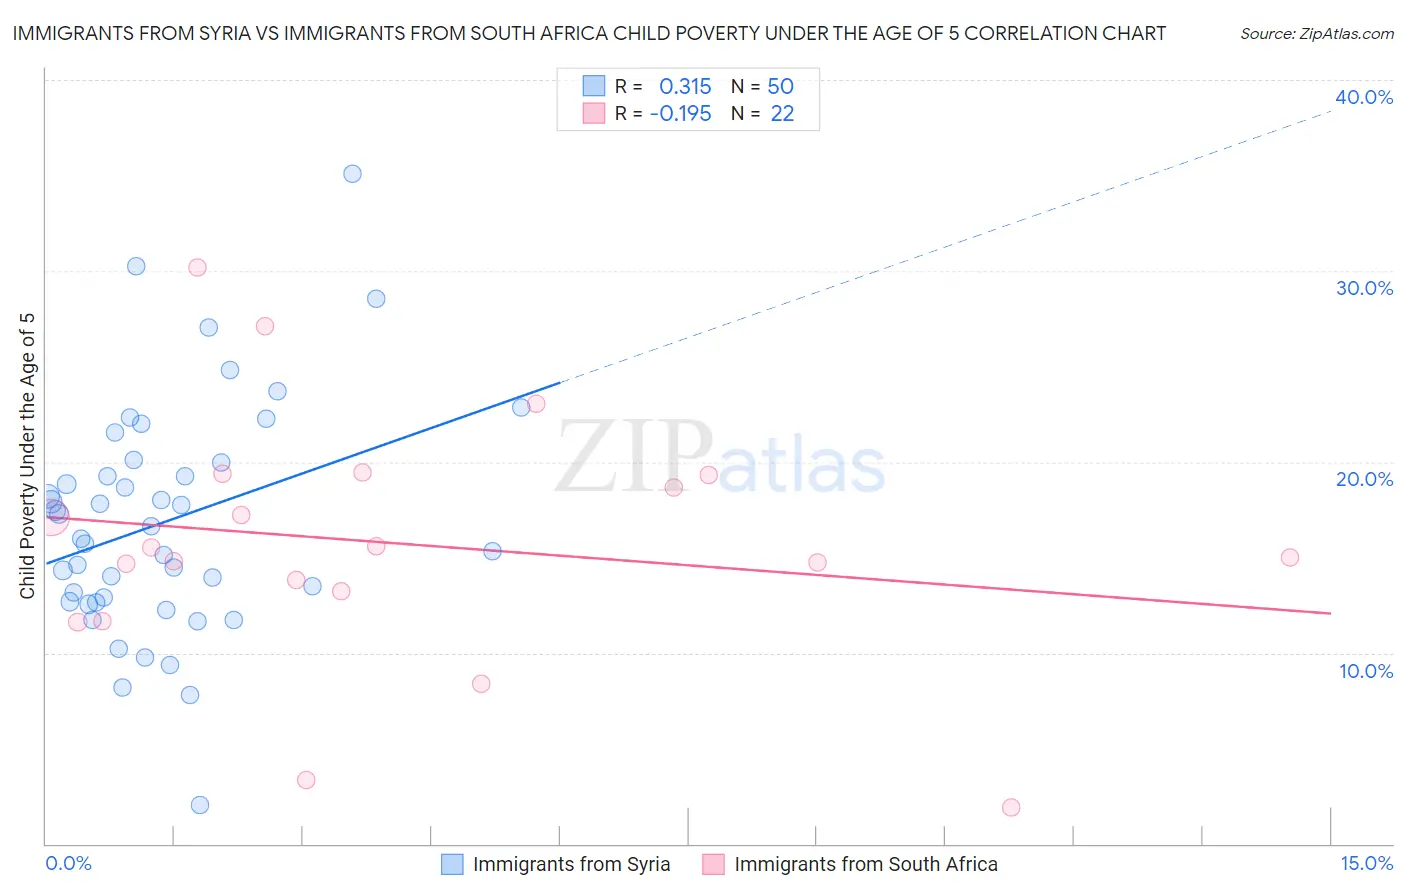 Immigrants from Syria vs Immigrants from South Africa Child Poverty Under the Age of 5